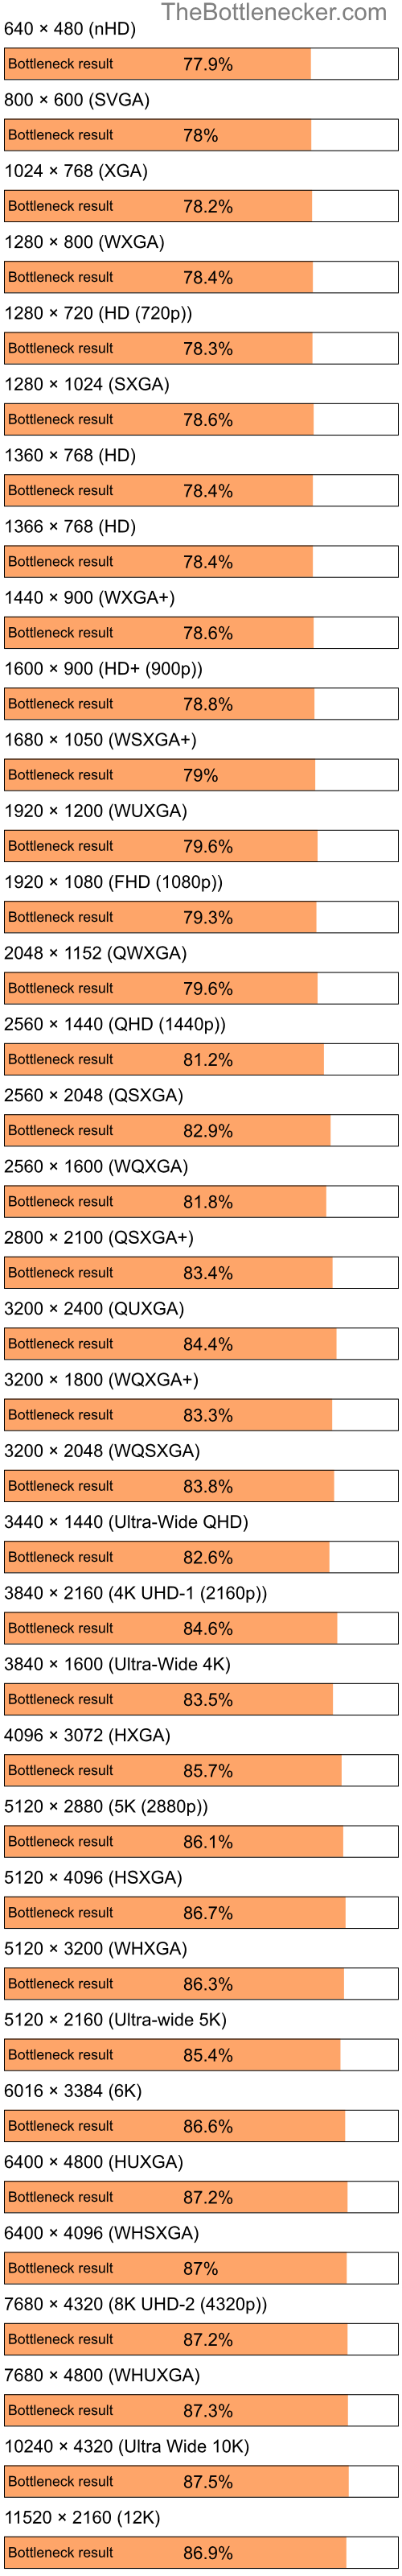 Bottleneck results by resolution for Intel Atom Z520 and Intel G31 Express in Graphic Card Intense Tasks